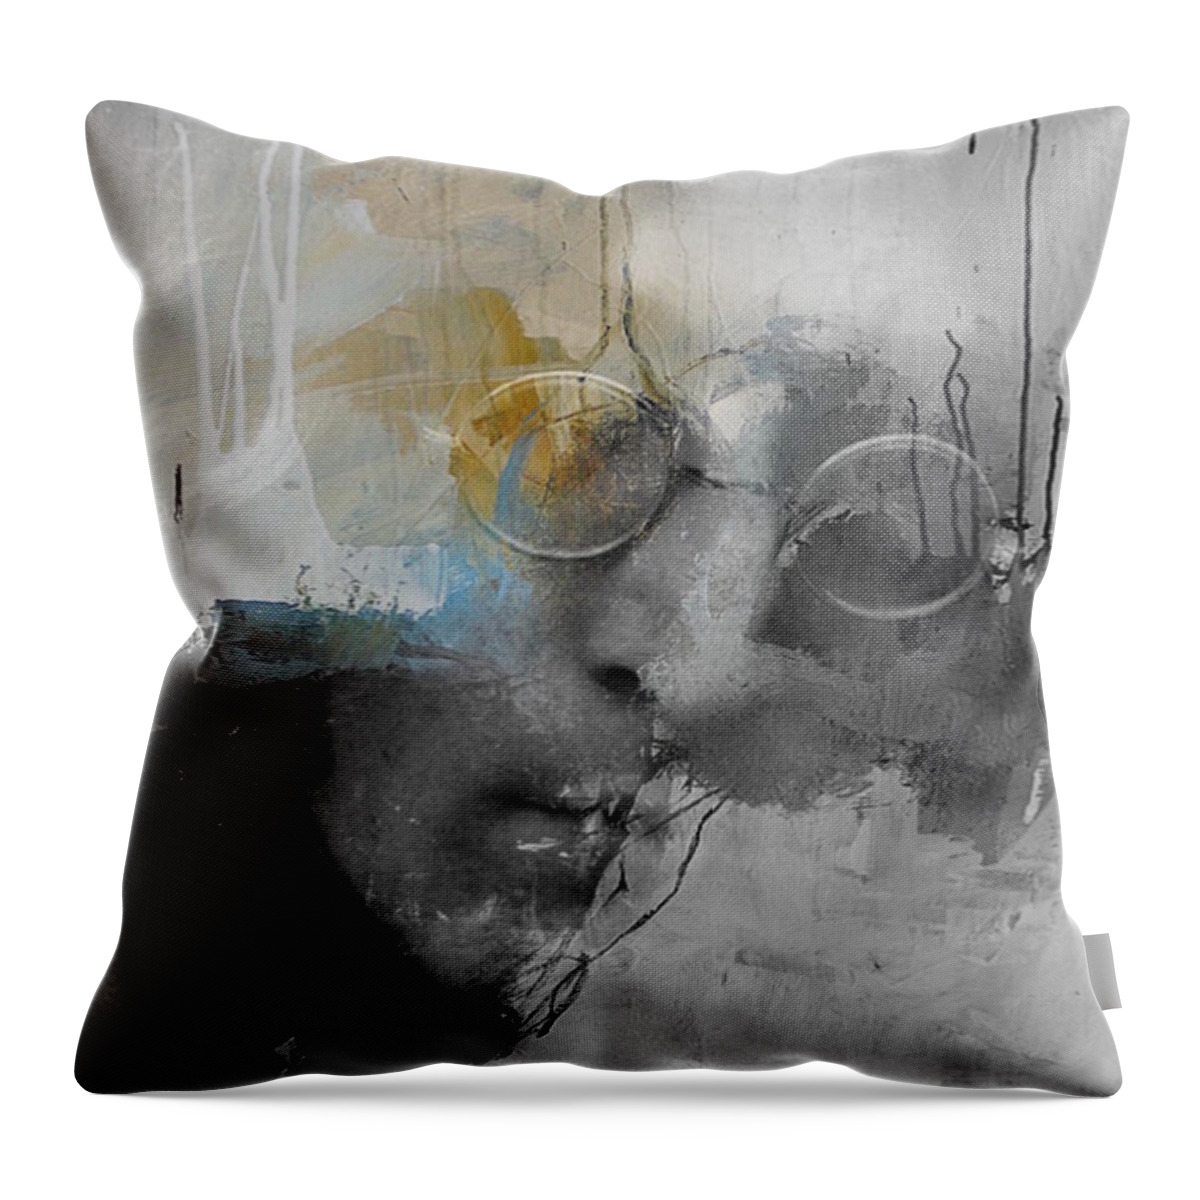 John Lennon Throw Pillow featuring the digital art Lucy In The Sky With Diamonds by Paul Lovering